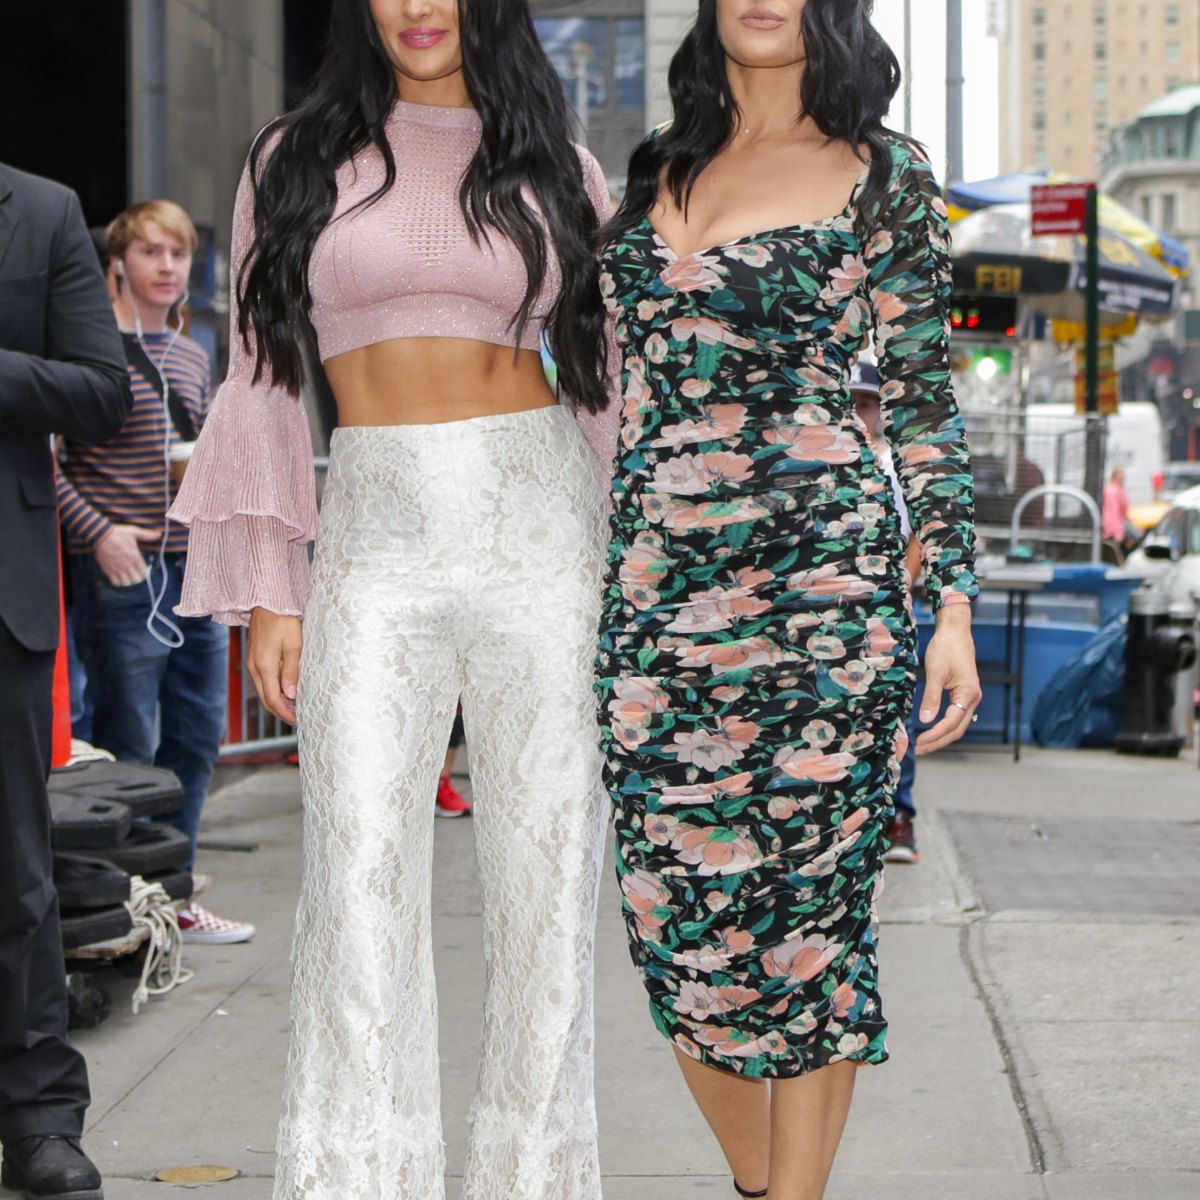 Nikki and Brie Bella step out in all-white ensembles for a lunch